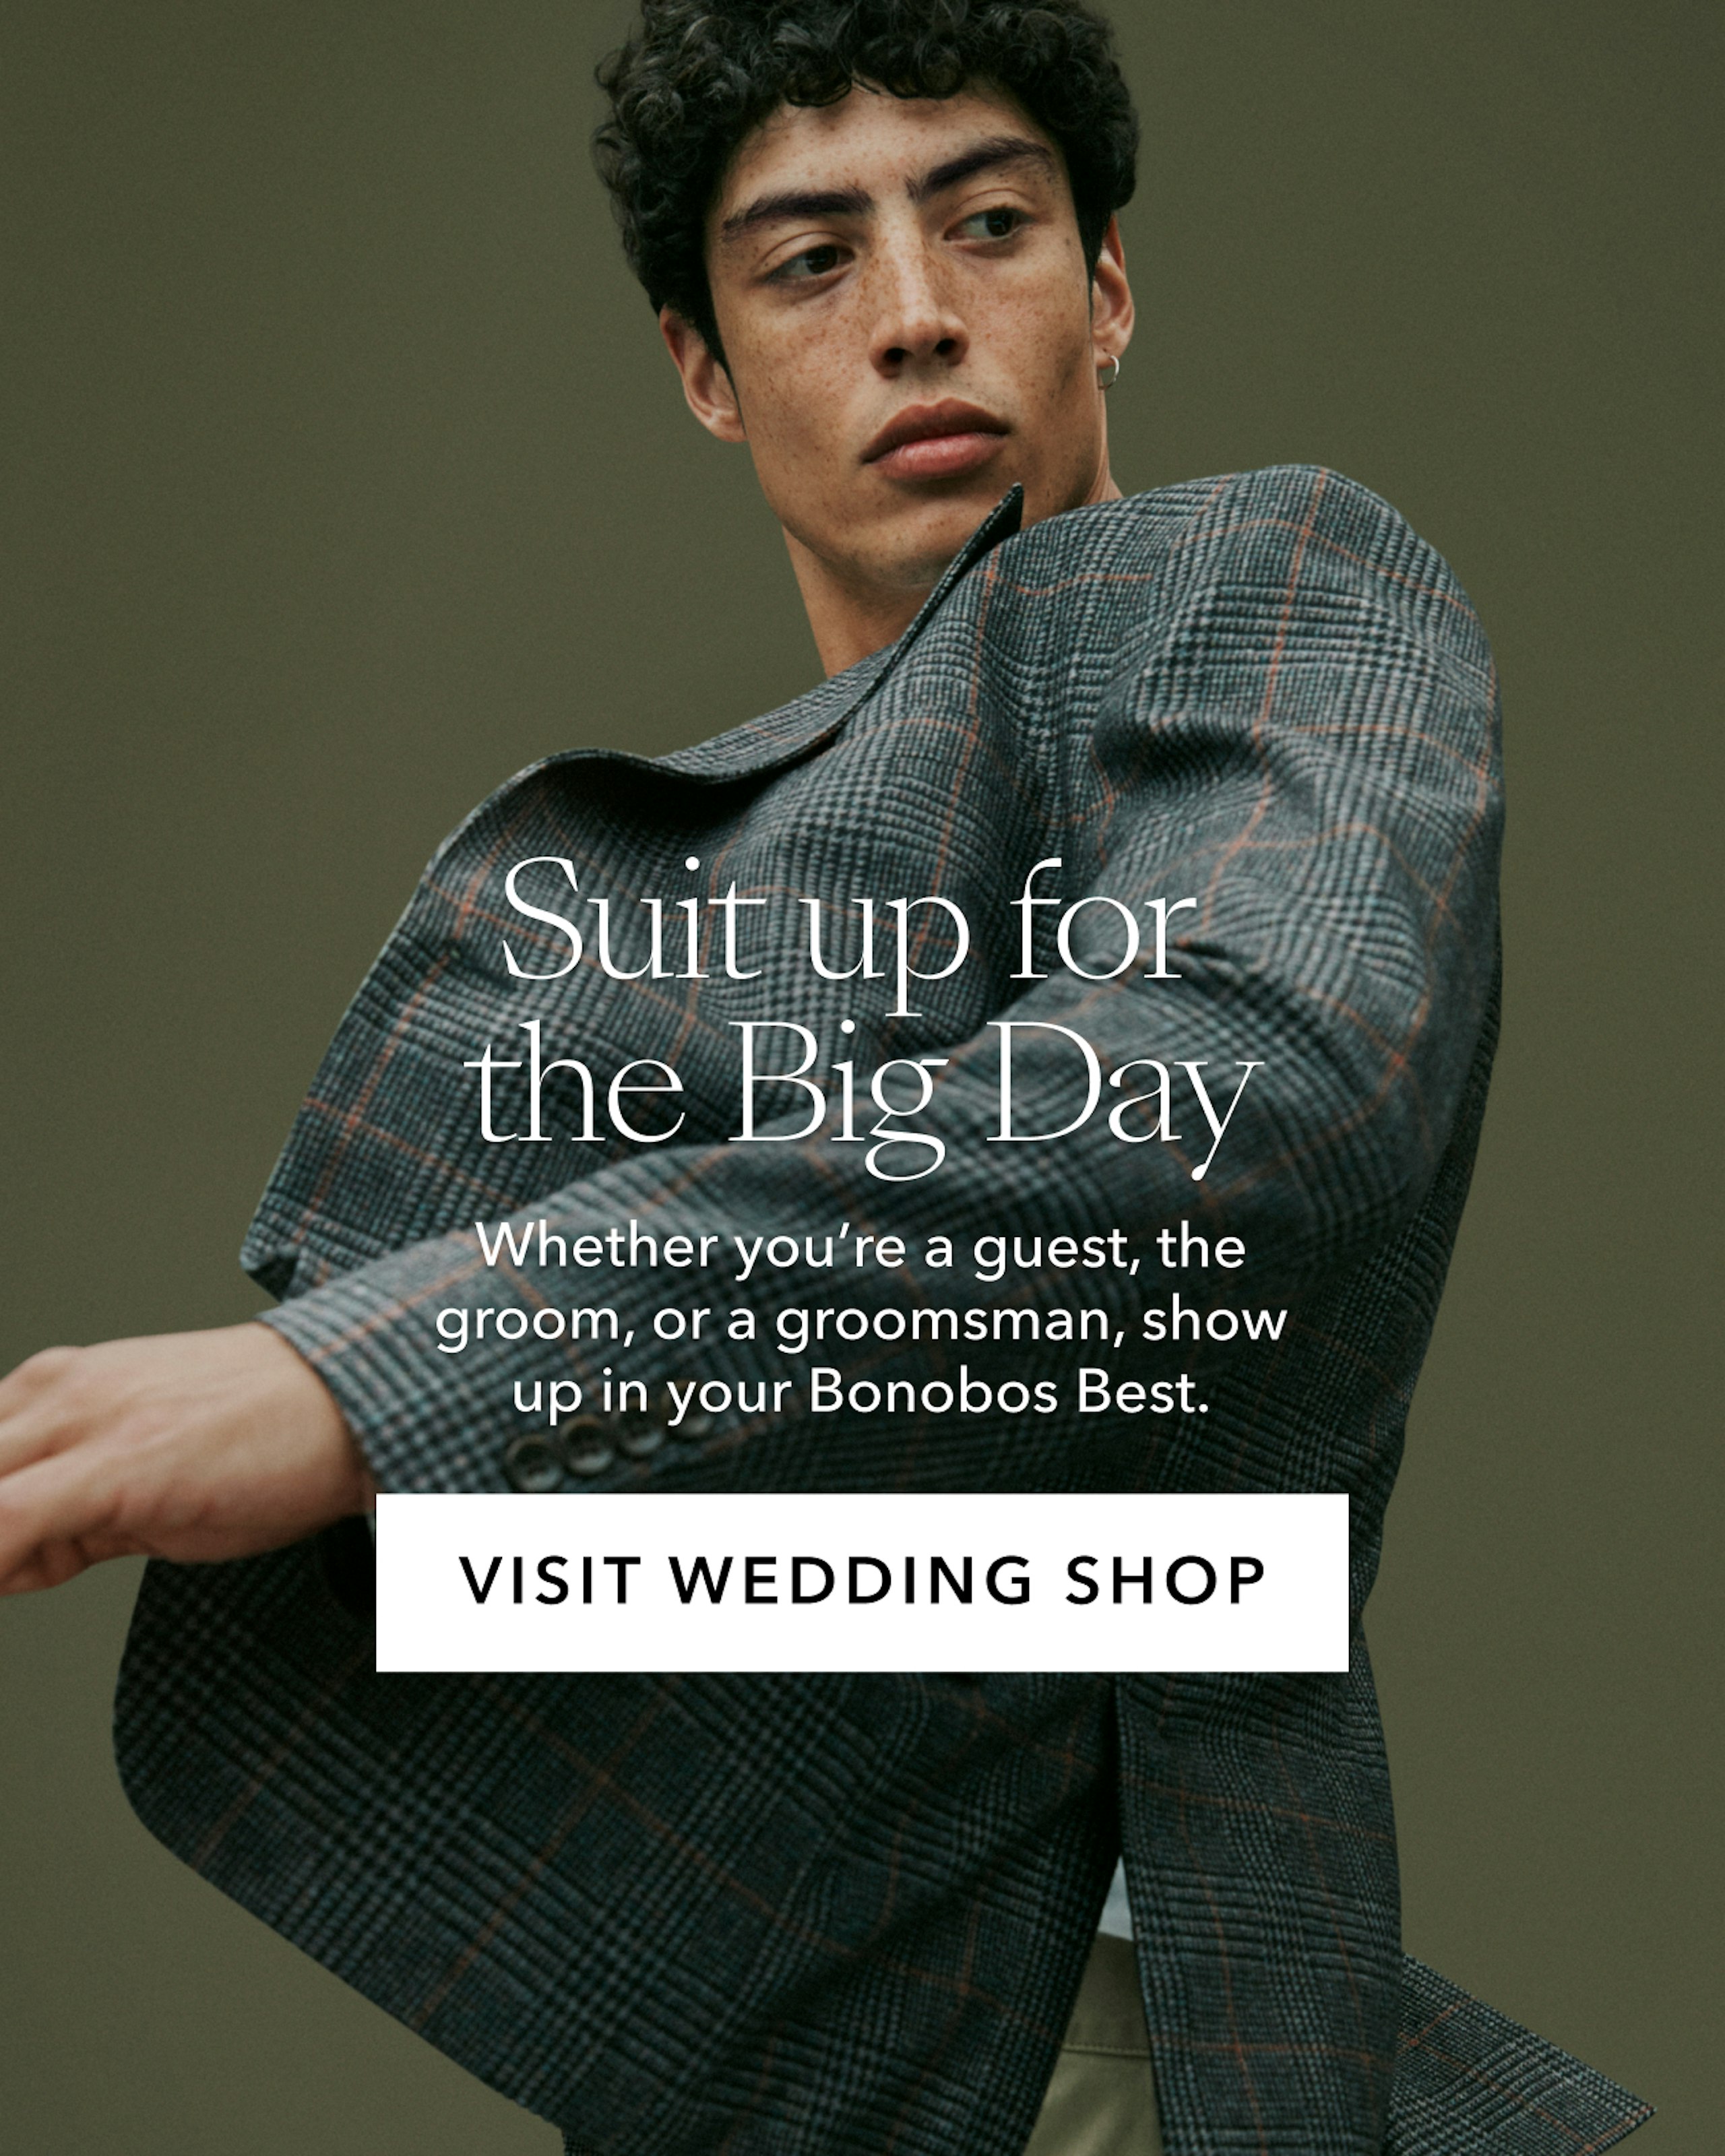 Man in suit, text reads: Suit up for the Big Day Whether you’re a guest, the groom, or a groomsman, show up in your Bonobos Best. VISIT WEDDING SHOP